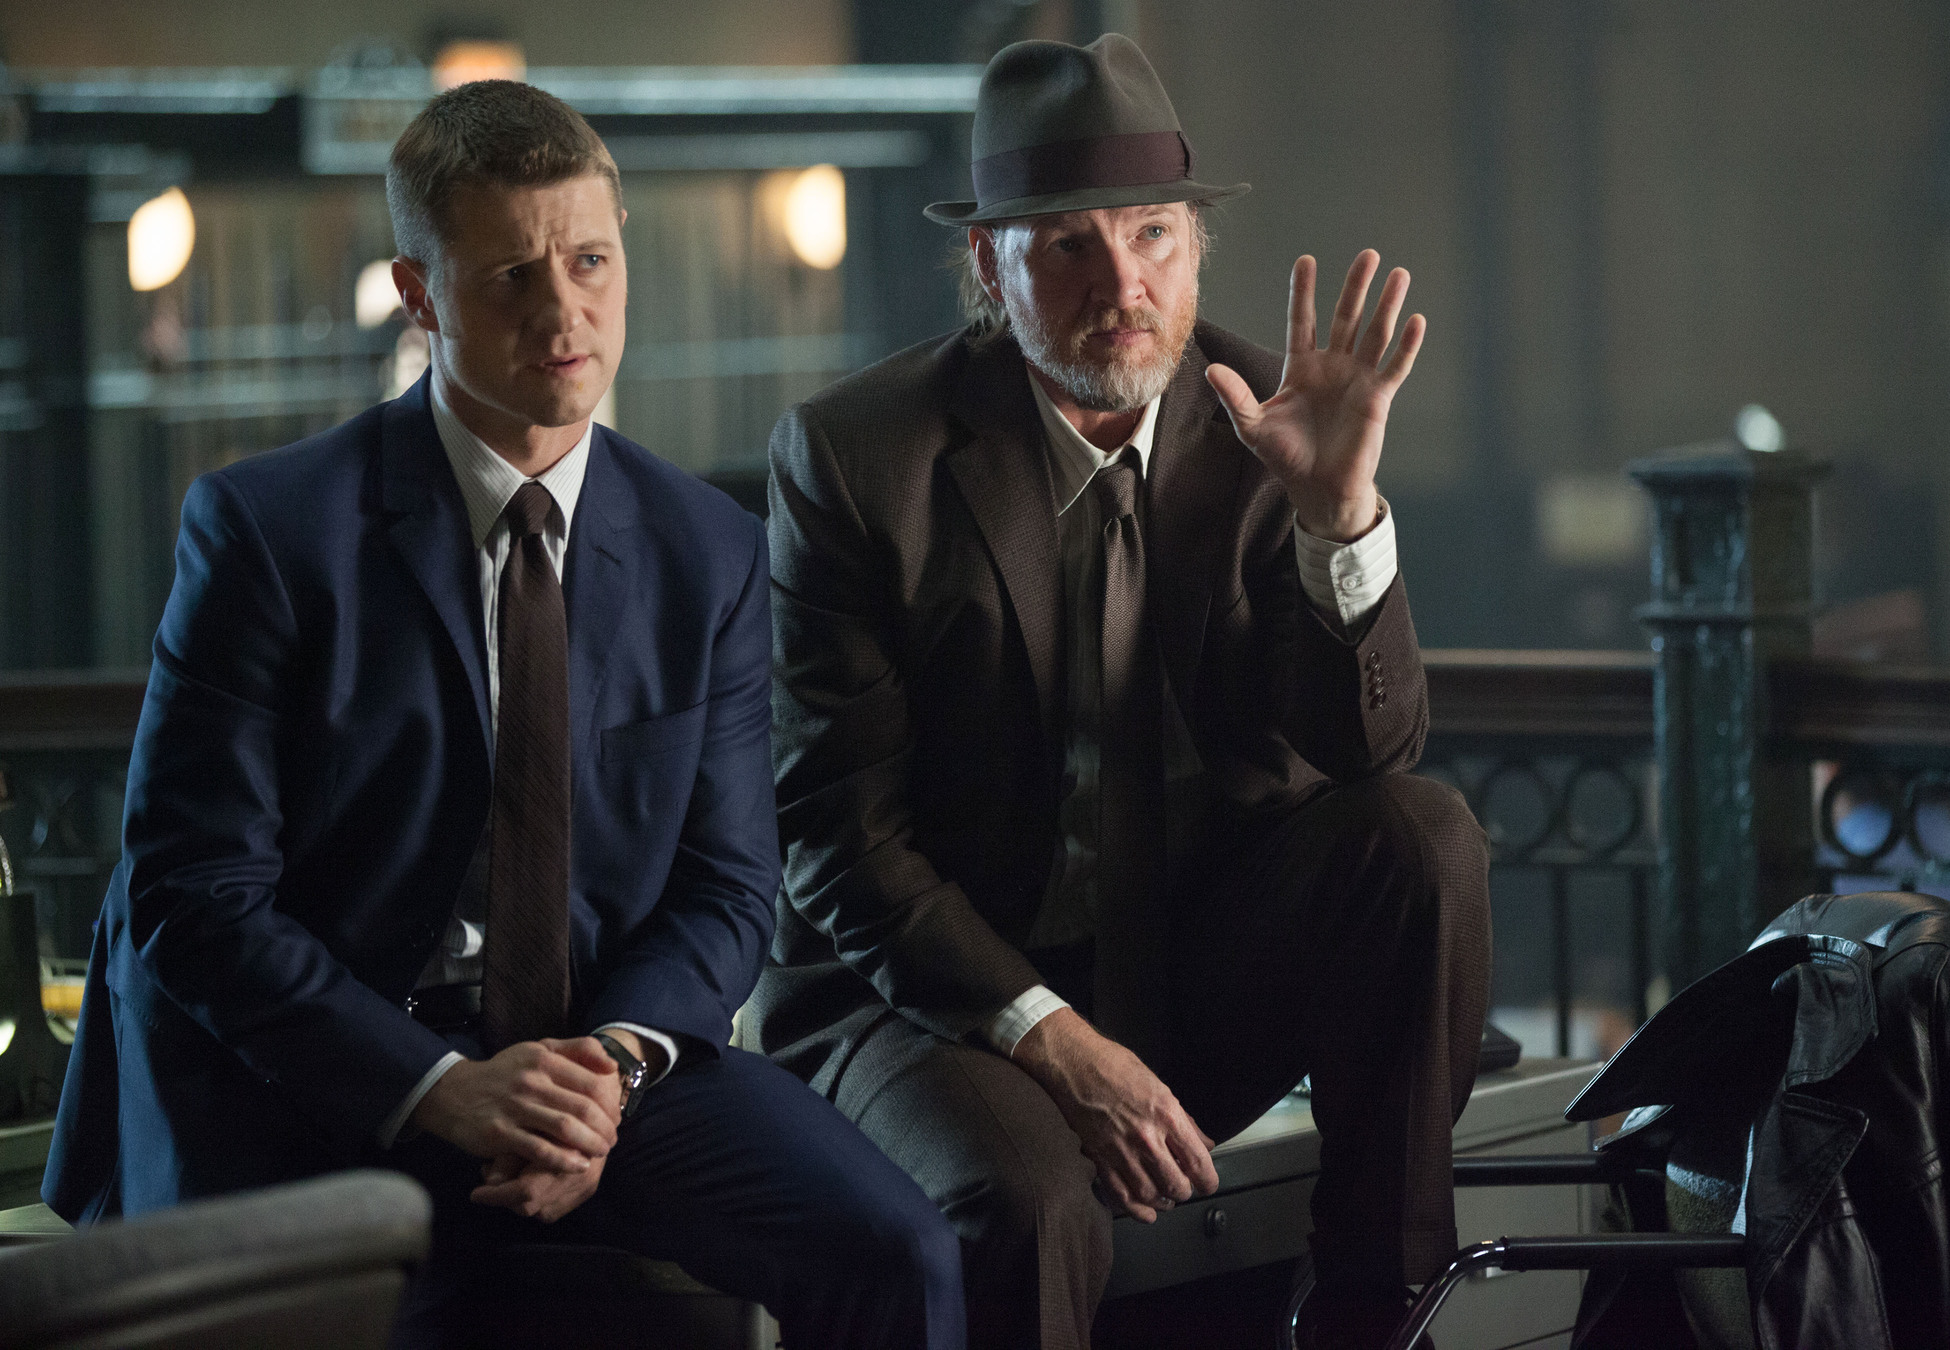 GOTHAM: Detecitves James Gordon (Ben McKenzie, L) and Harvey Bullock (Donal Logue, R) learn information about a case in the "Harvey Dent" episode of GOTHAM airing Monday, Nov. 17 (8:00-9:00 PM ET/PT) on FOX. Â©2014 Fox Broadcasting Co. Cr: Jessica Miglio/FOX